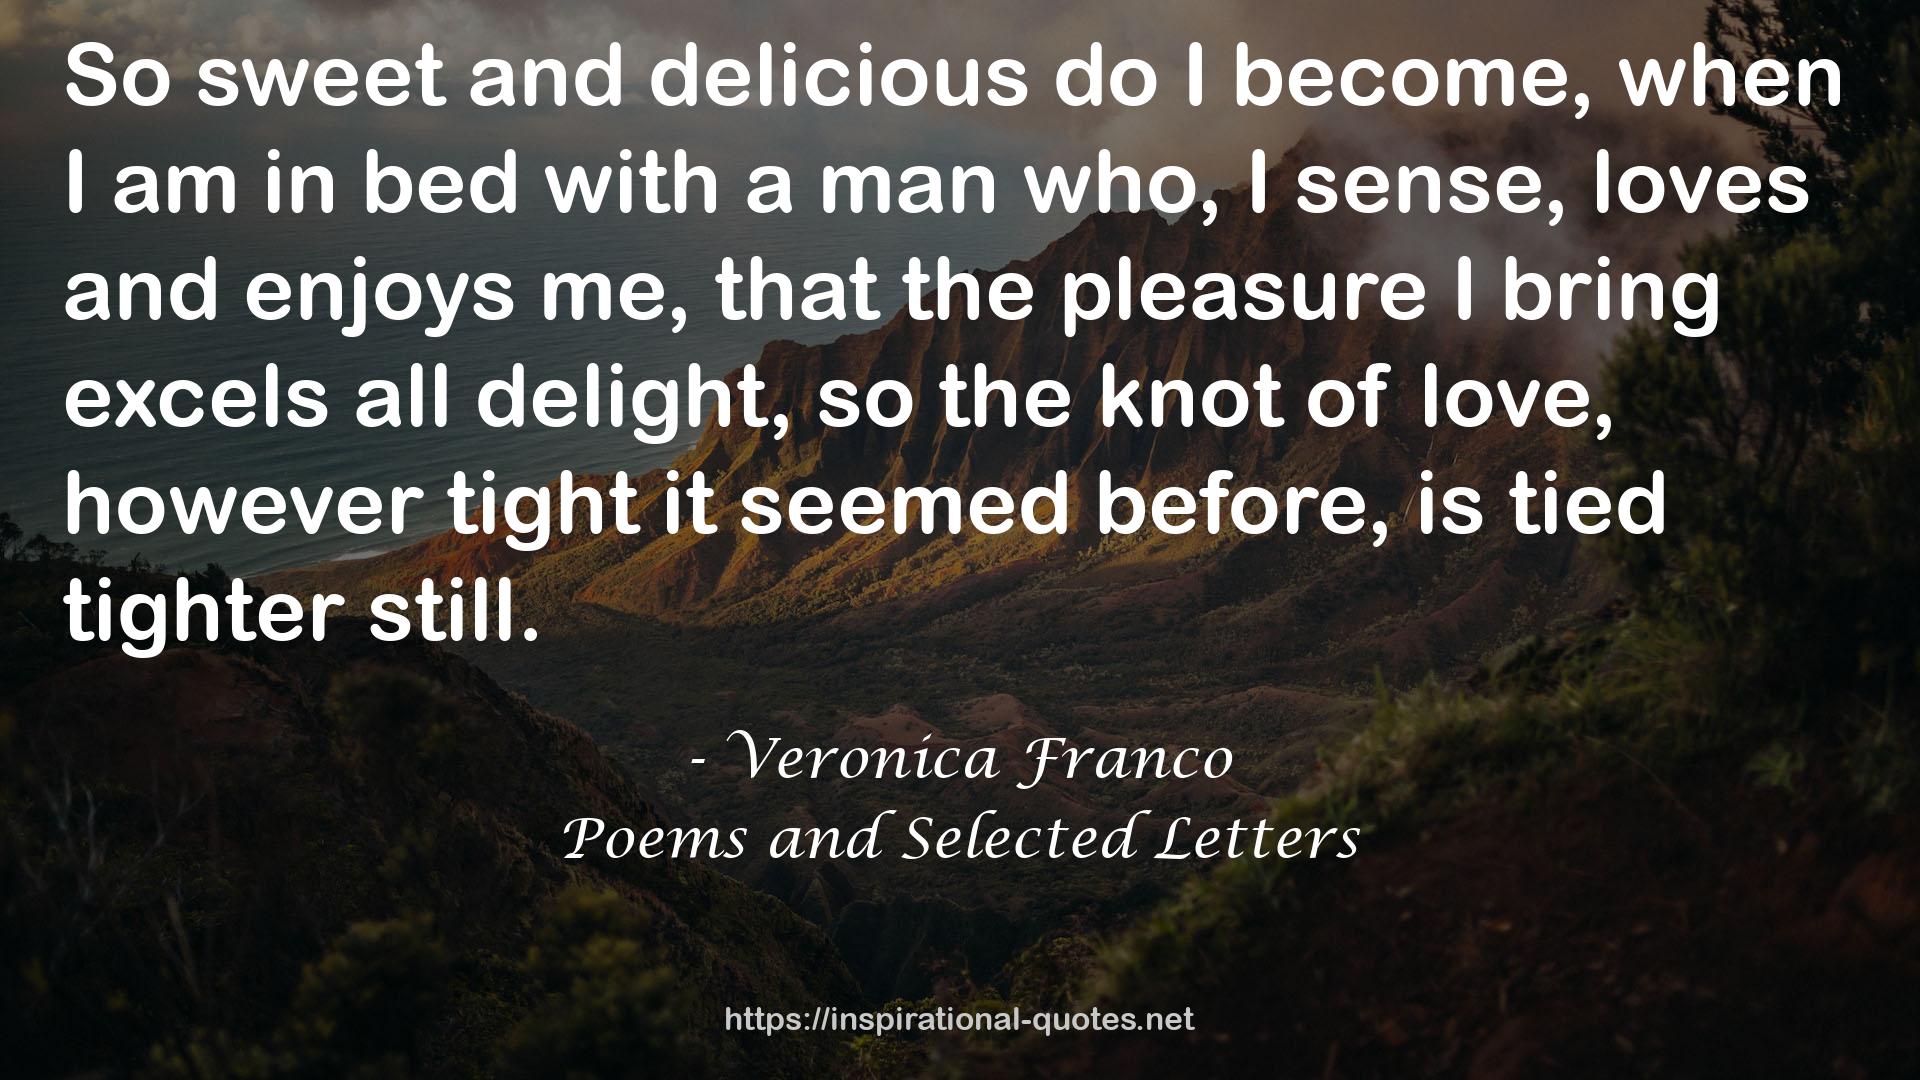 Poems and Selected Letters QUOTES